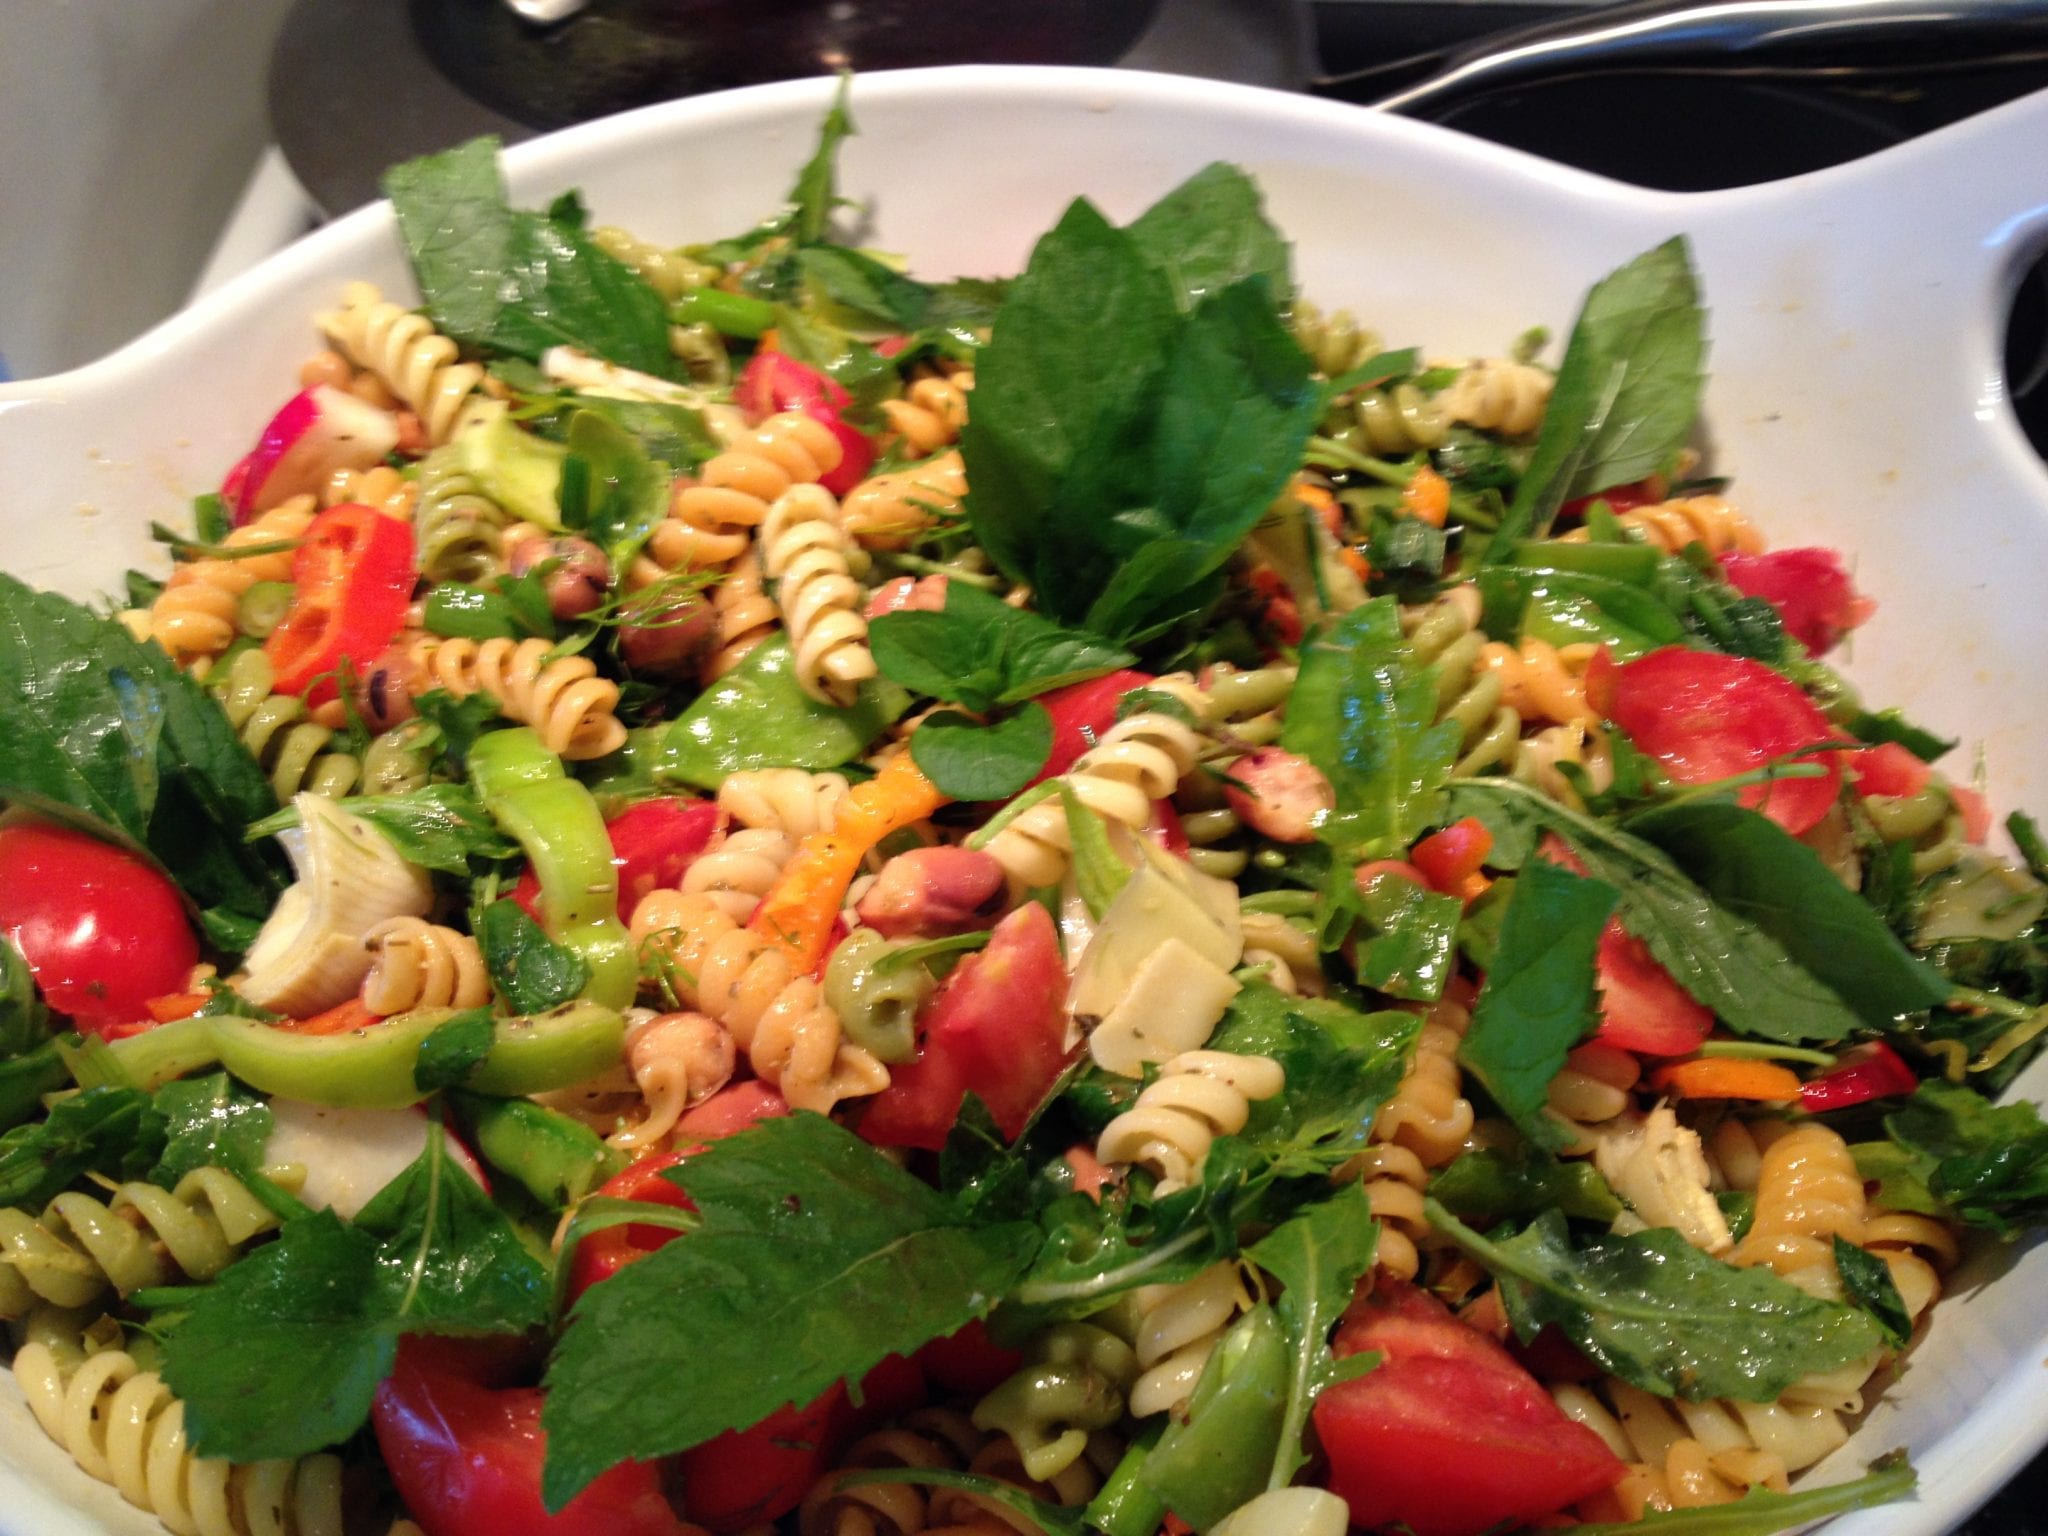 Minted Pasta Salad with Fava and Peas